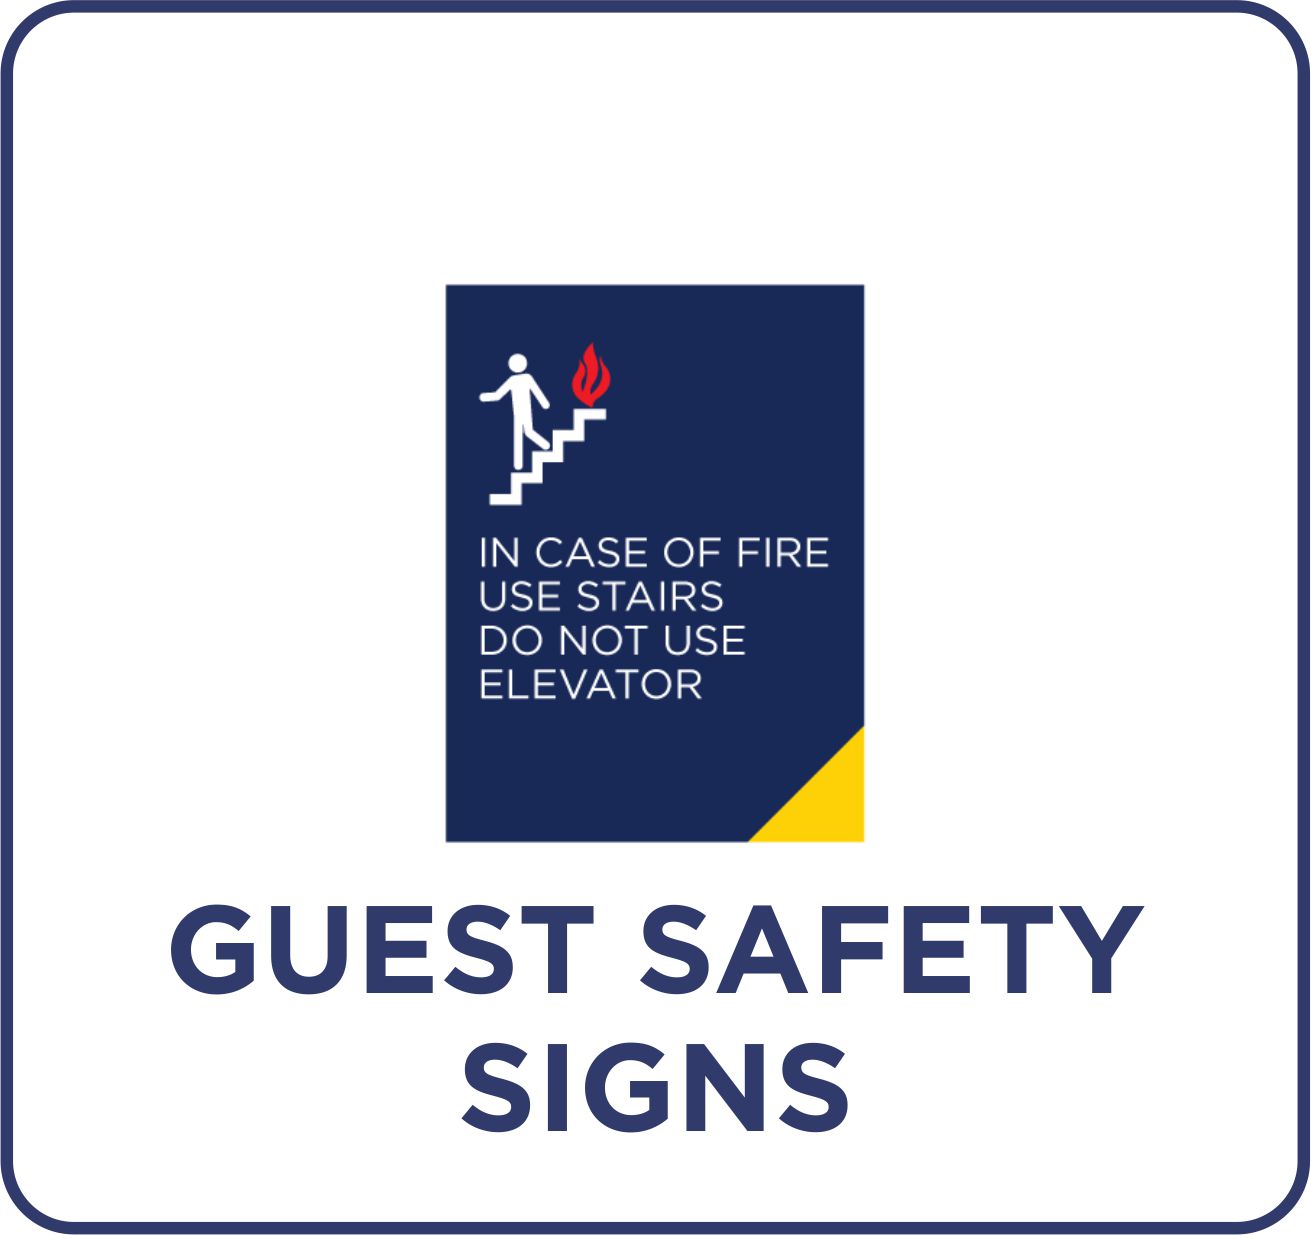 Moda - Guest Safety Signs